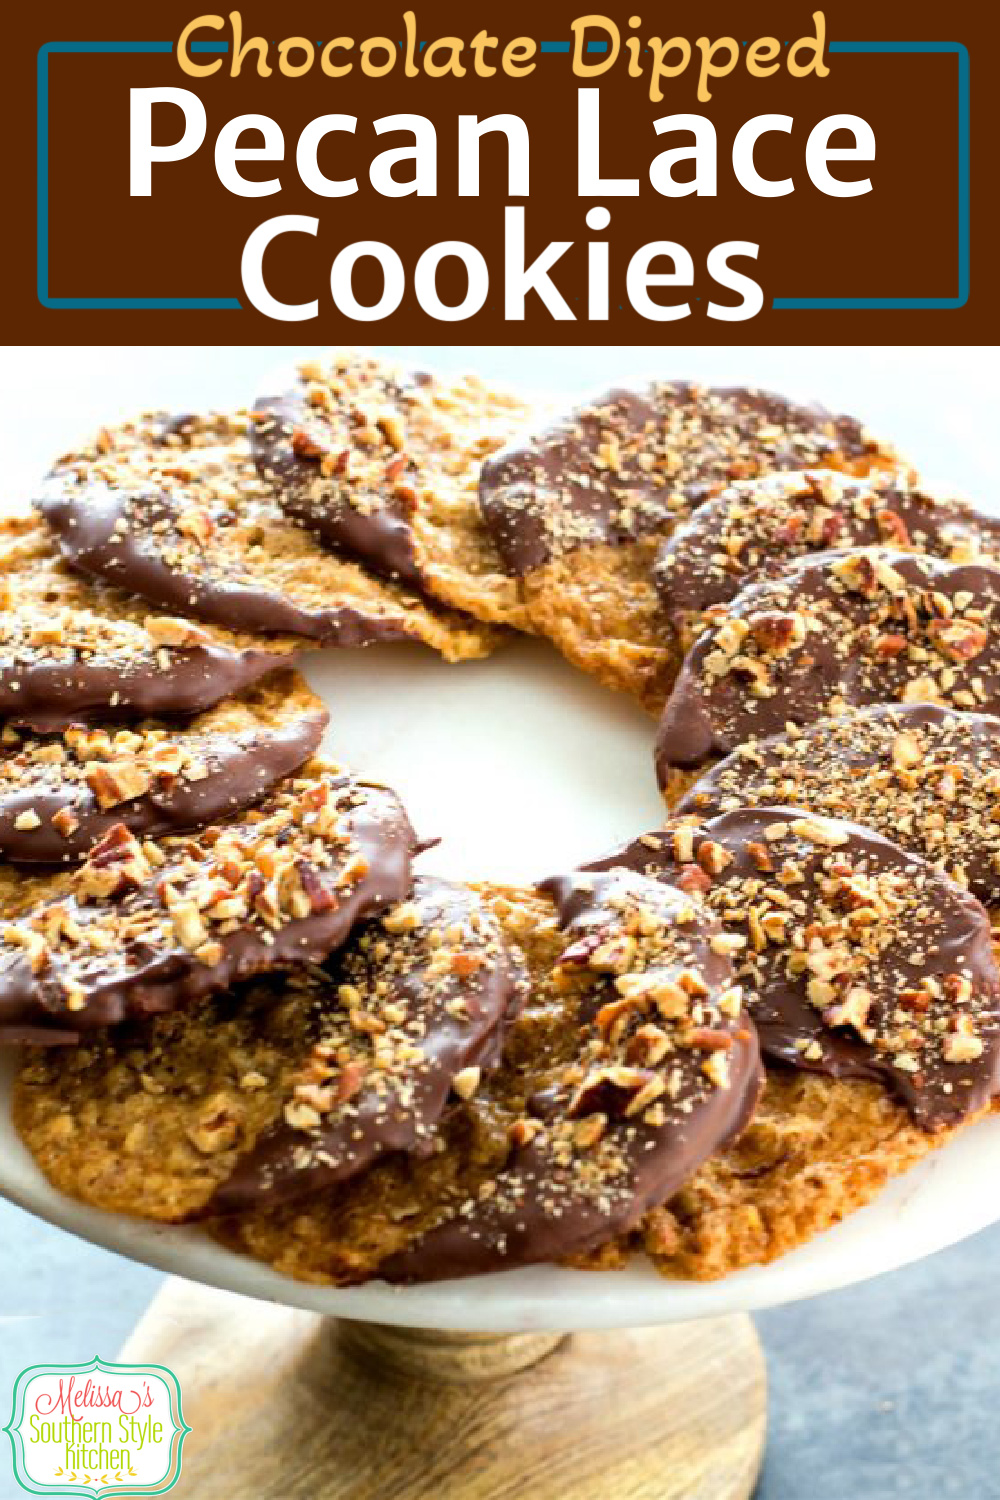 Insanely delicious Chocolate Dipped Pecan Lace Cookies #lacecookies #pecancookies #chocolate #chocolatedippedcookies #cookierecipes #holidaybaking #holidays #pecans #desserts #dessertfoodrecipes #southernfood #southernrecipes via @melissasssk